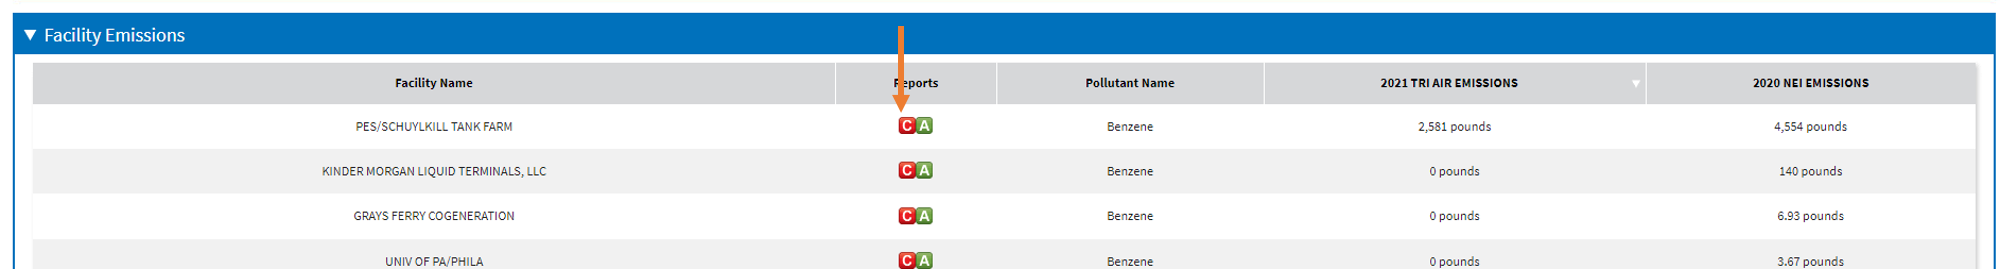 Facility emissions table on the air pollutant report with an arrow pointing to the detailed facility report icon for the top facility